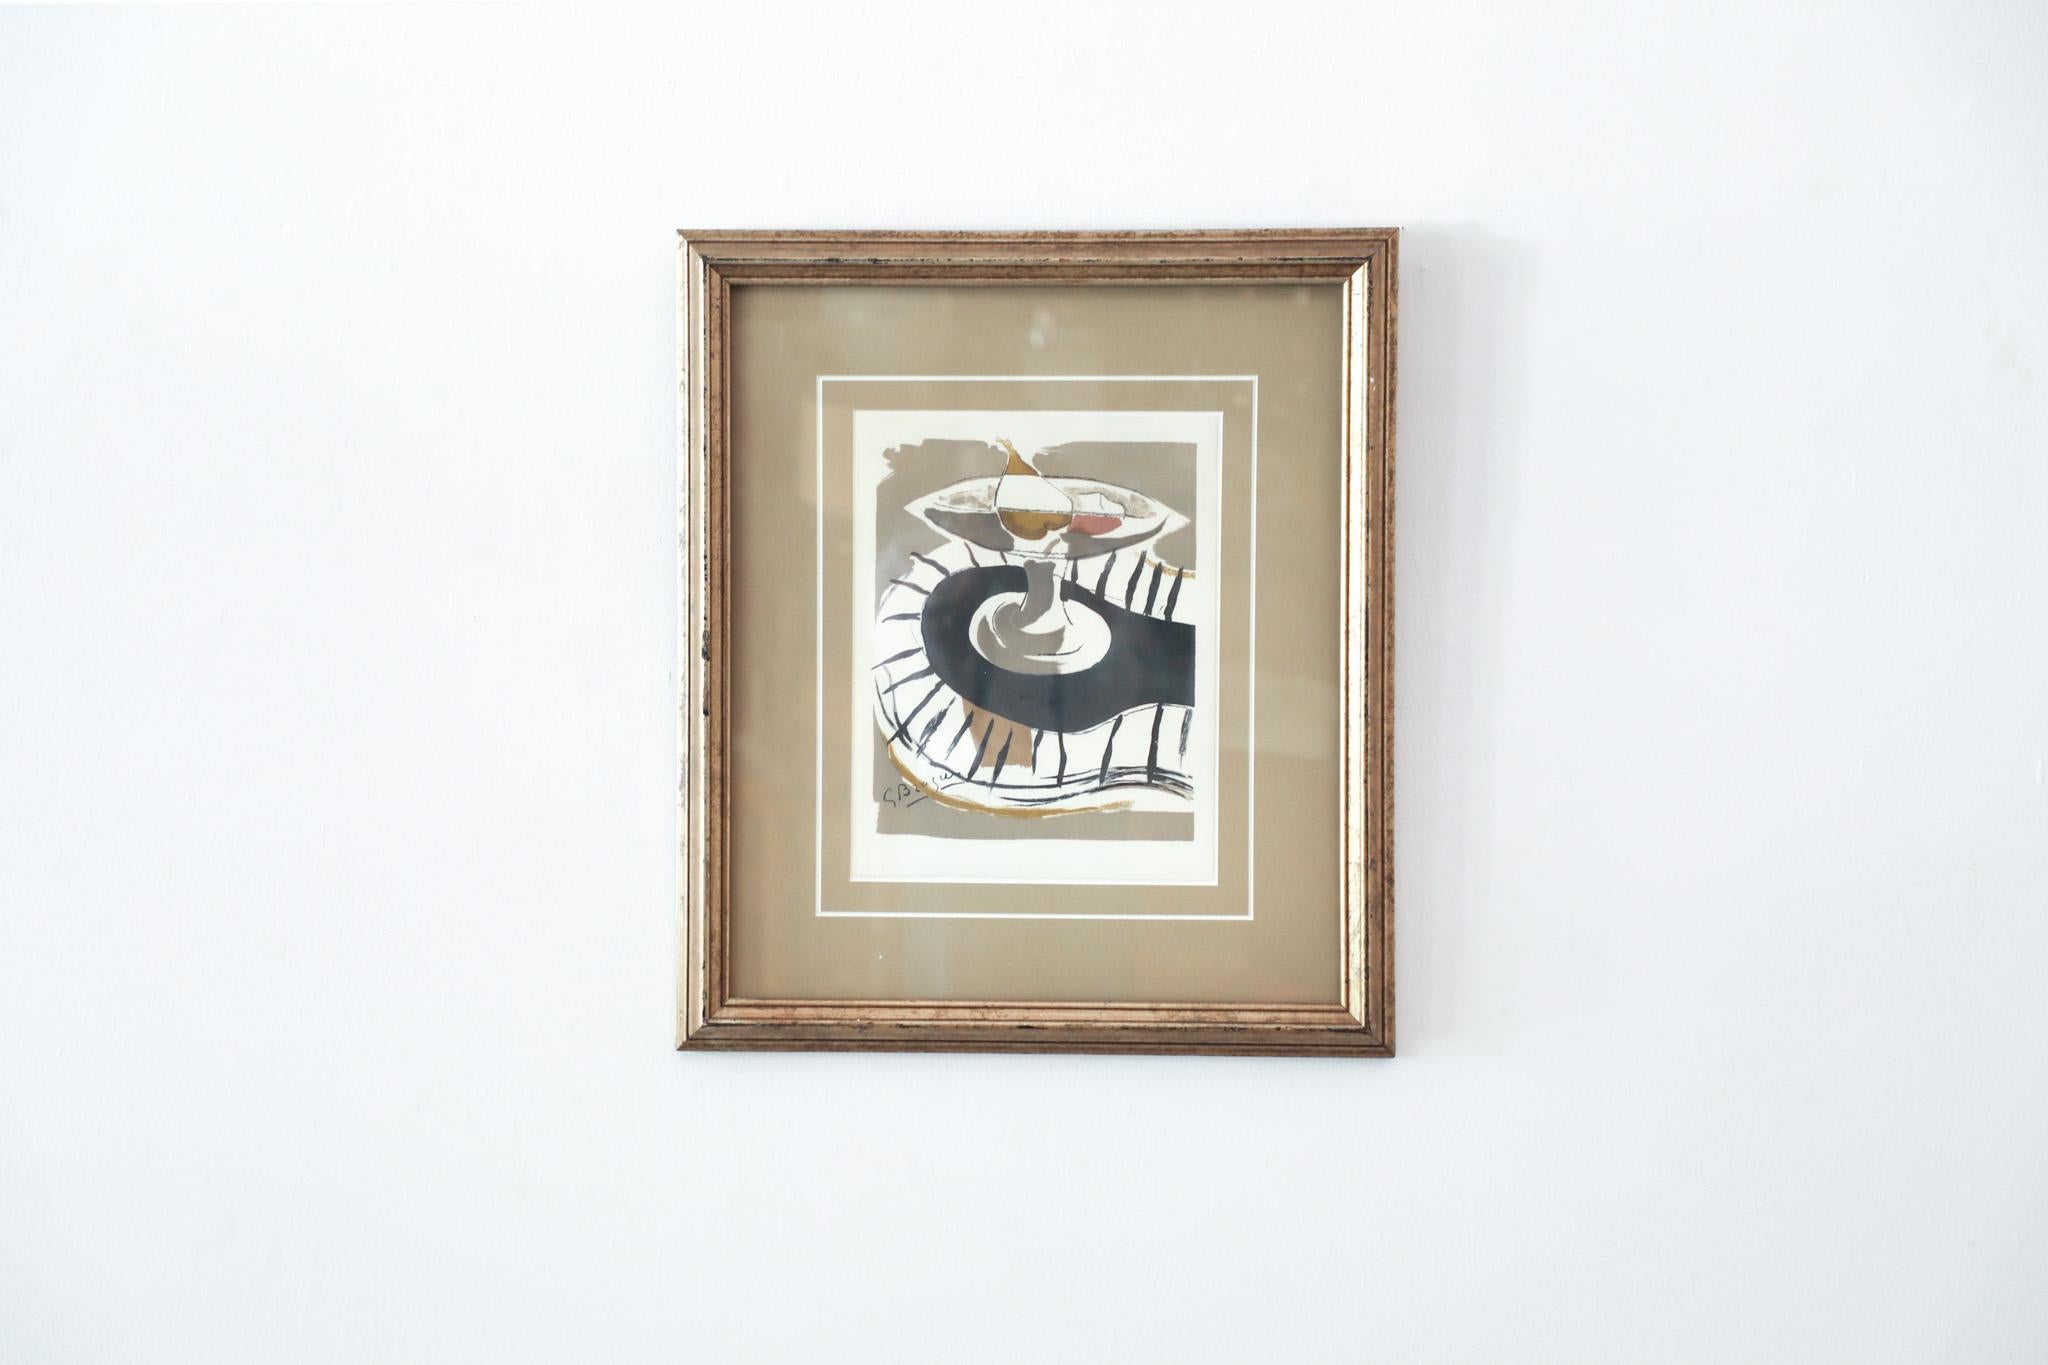 Mid-Century Georges Braque 'Le Compote' lithograph is an abstract still life depiction of a pear in compote. Braque is known as one of the pioneers of cubism along with Pablo Picasso This fine example shows his versatility and elegance with an eye